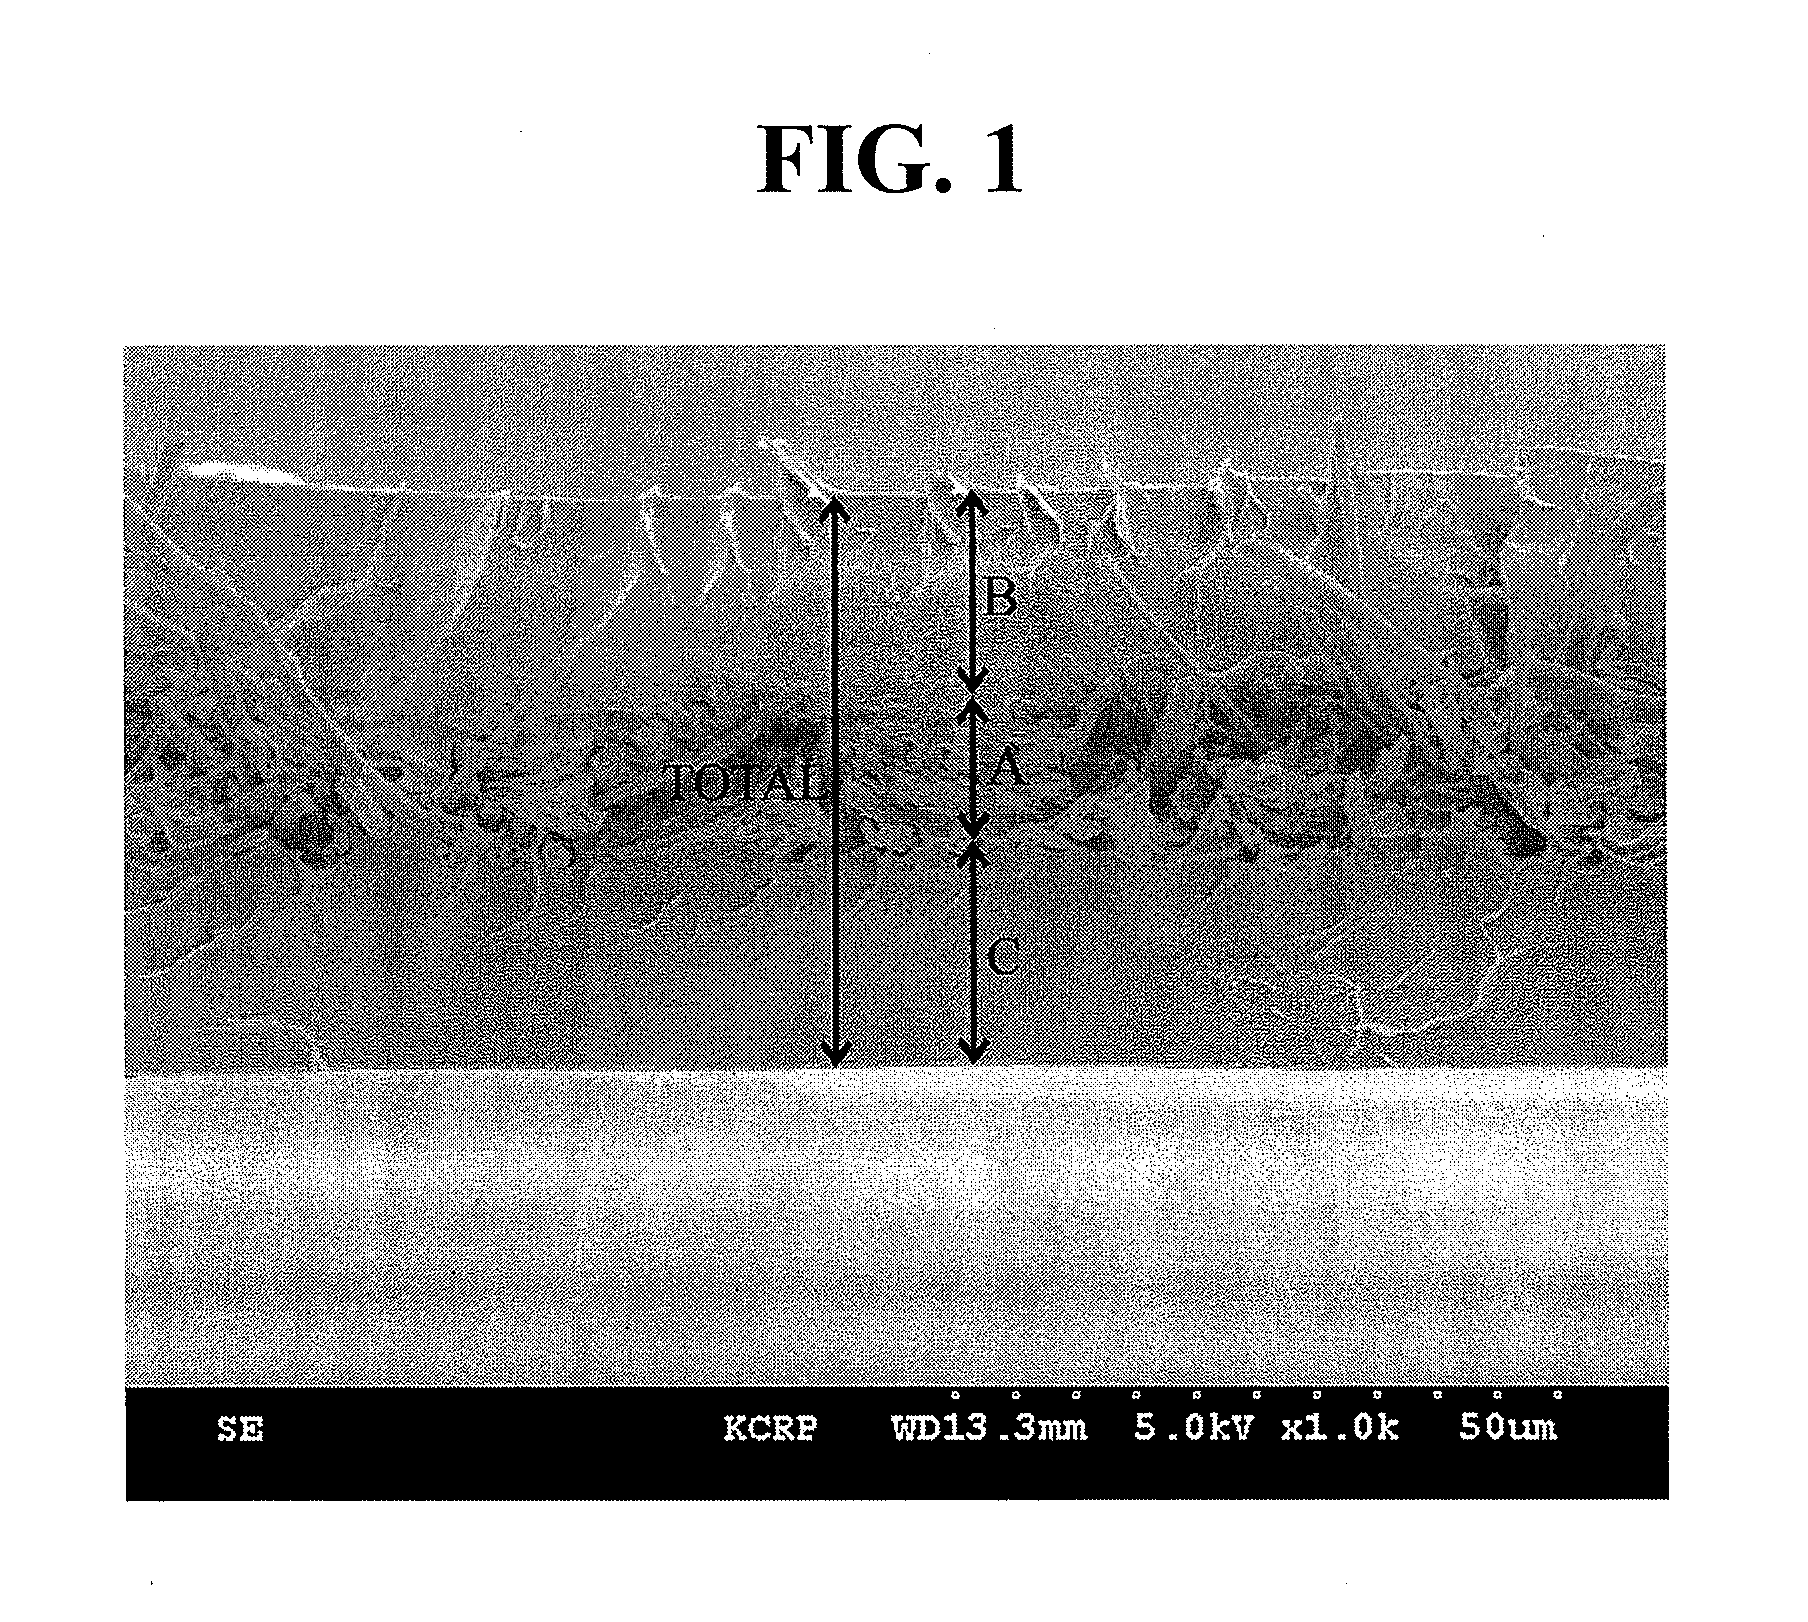 Polymer electrolyte membrane for a fuel cell, and method for preparing same